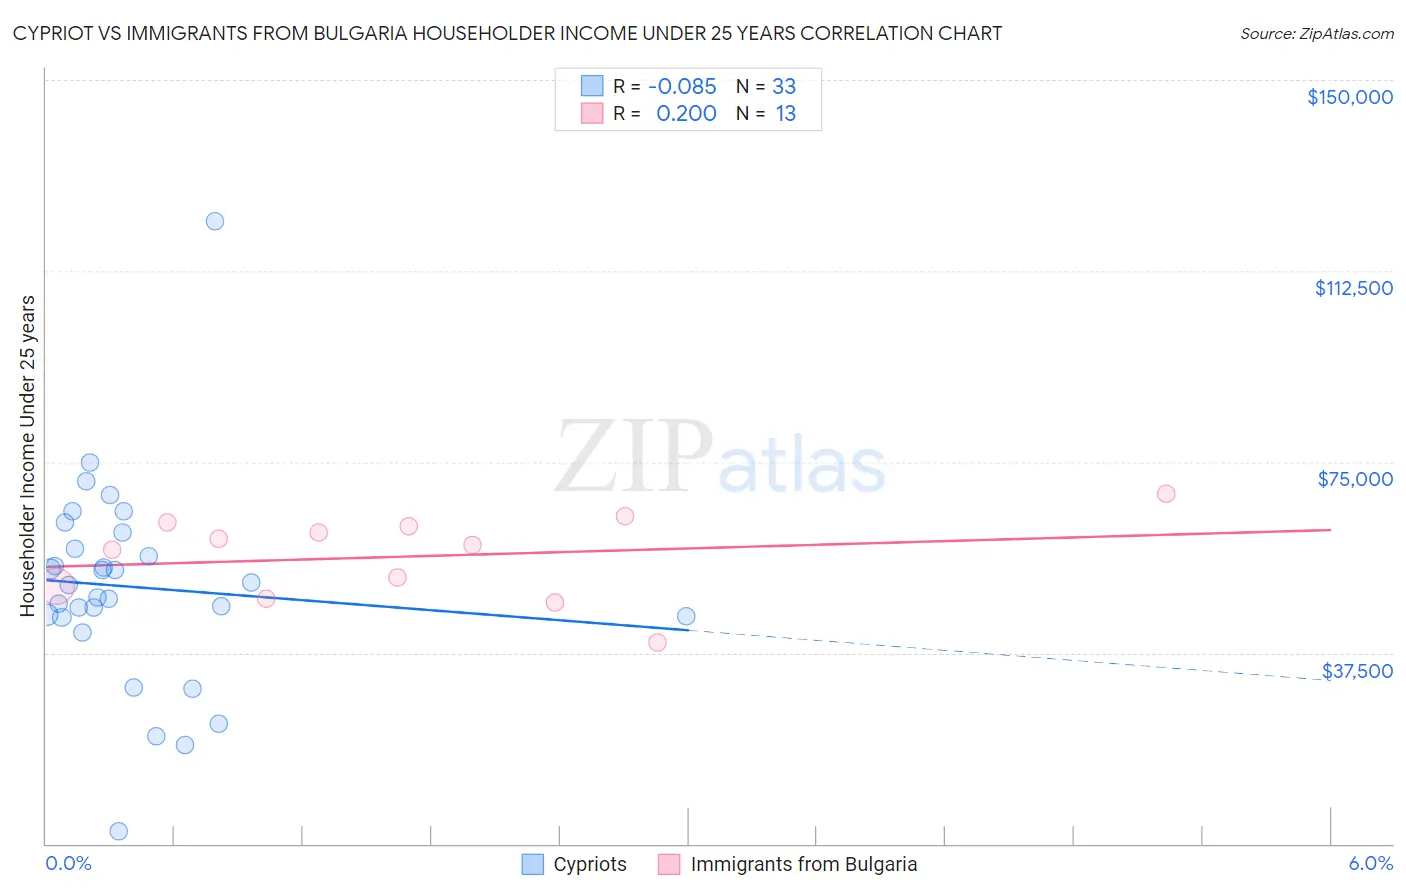 Cypriot vs Immigrants from Bulgaria Householder Income Under 25 years